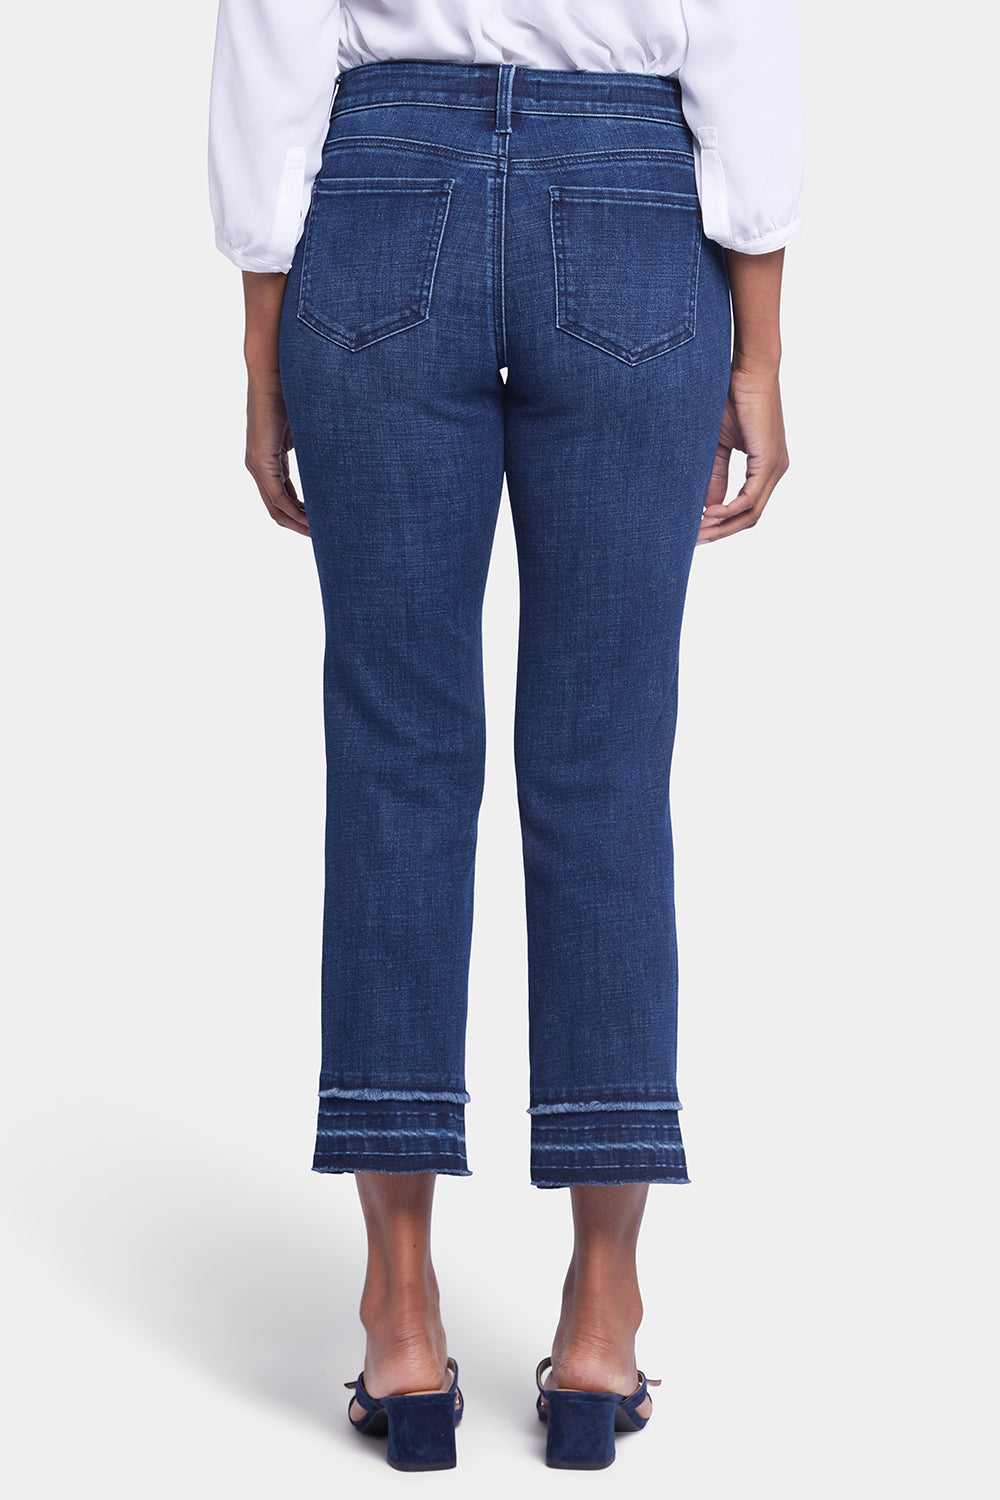 NYDJ Marilyn Straight Ankle Jeans With Attached Released Hems - Inspire